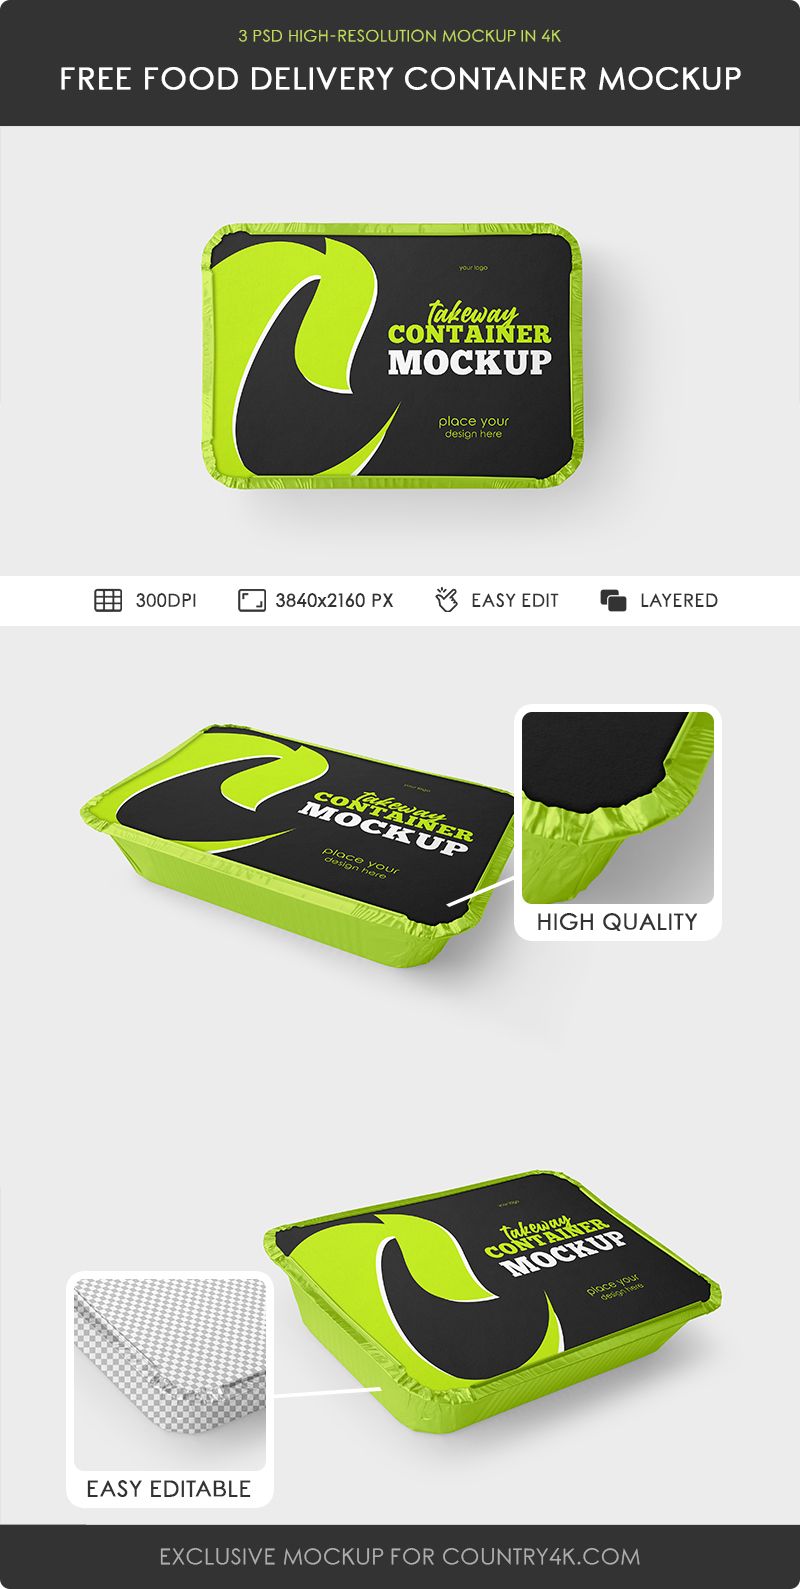 Preview mockup 3 takeaway food delivery container 3 free mockups psd